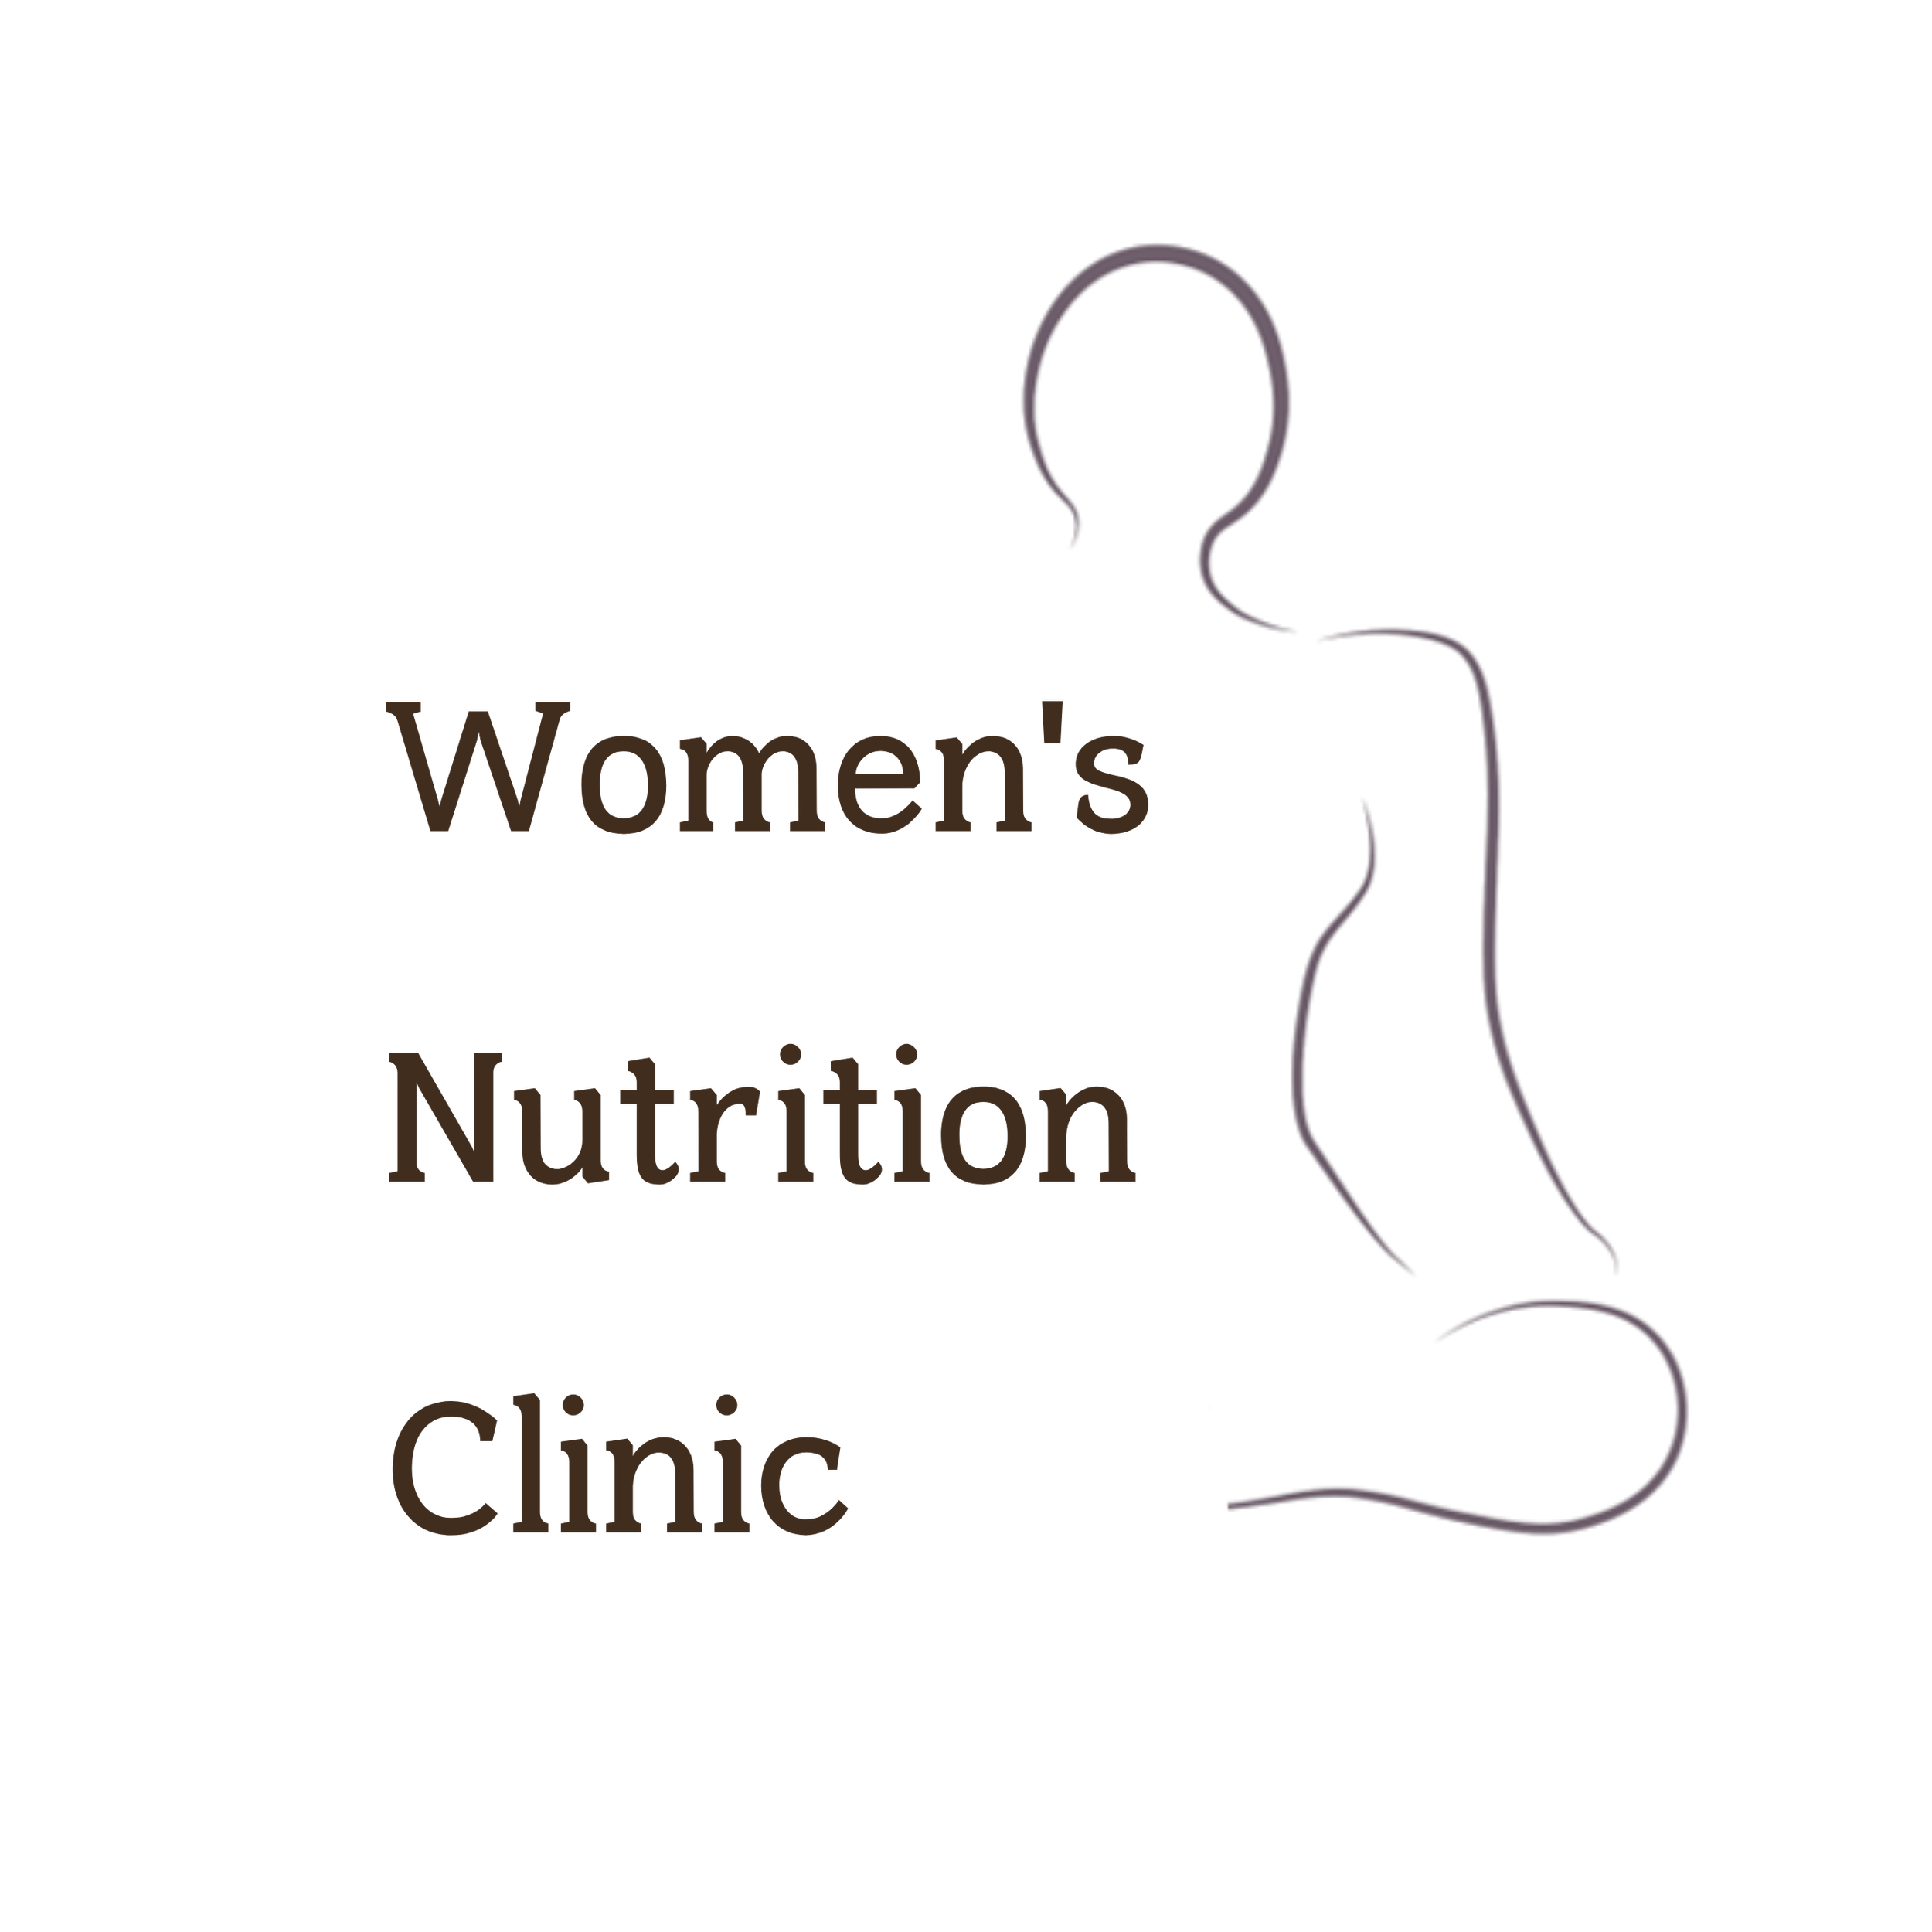 Women's Nutrition Clinic (4).png